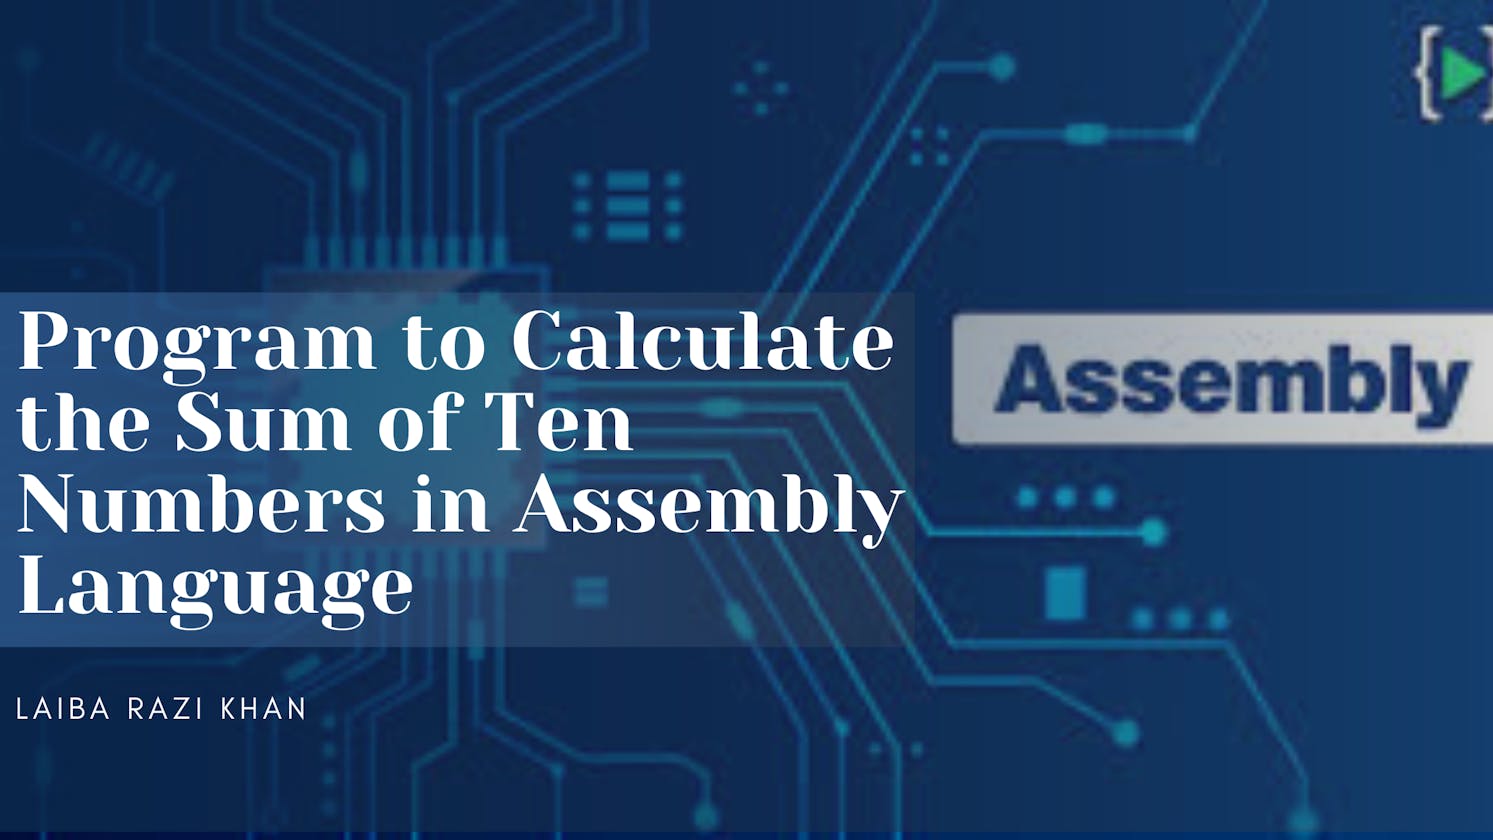 Program to Calculate the Sum of Ten Numbers in Assembly Language